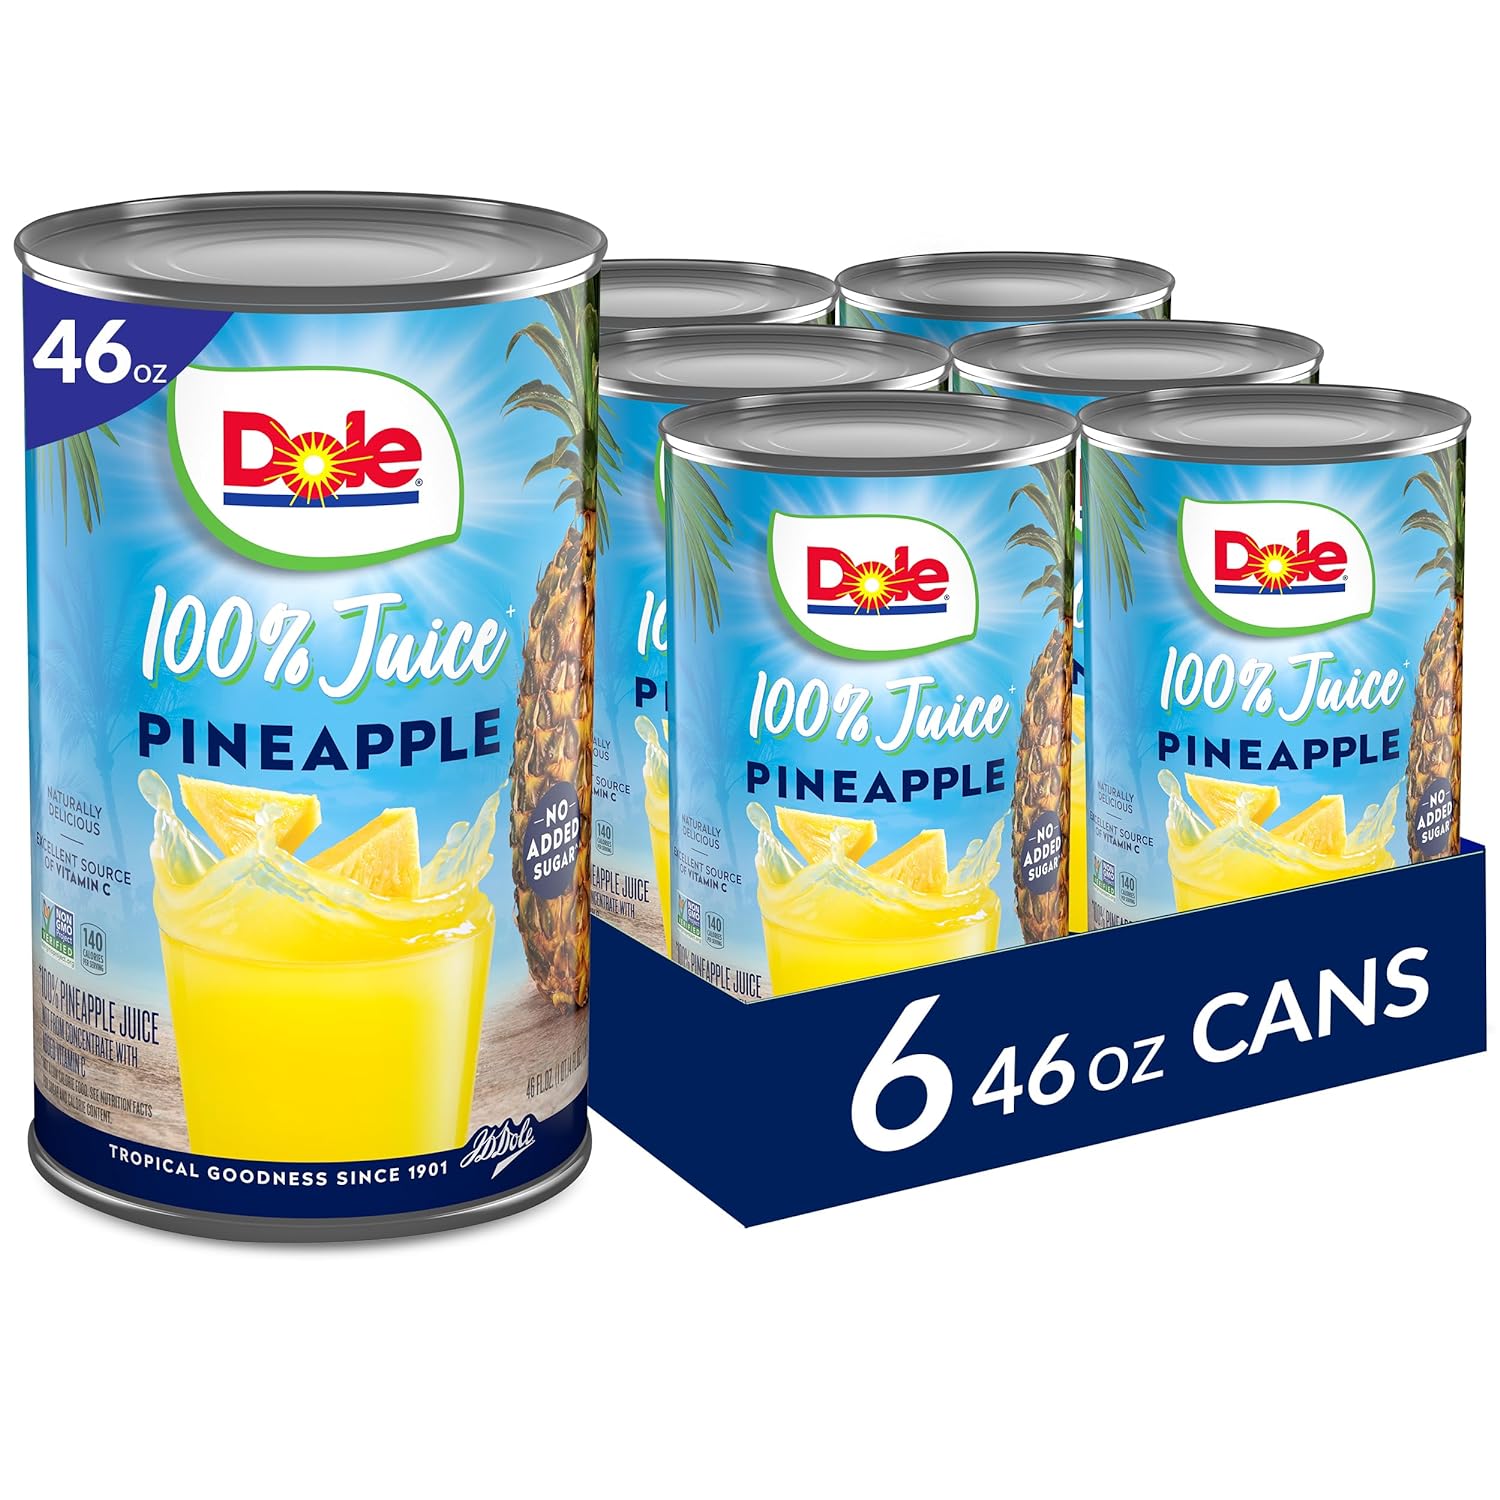 My favorite pineapple juice! I've always loved this pineapple juice.It's not too sweet either. The only complaint I would have is that the cans get dented during shipping, but doesn't affect the flavor at all! Would recommend to anyone!